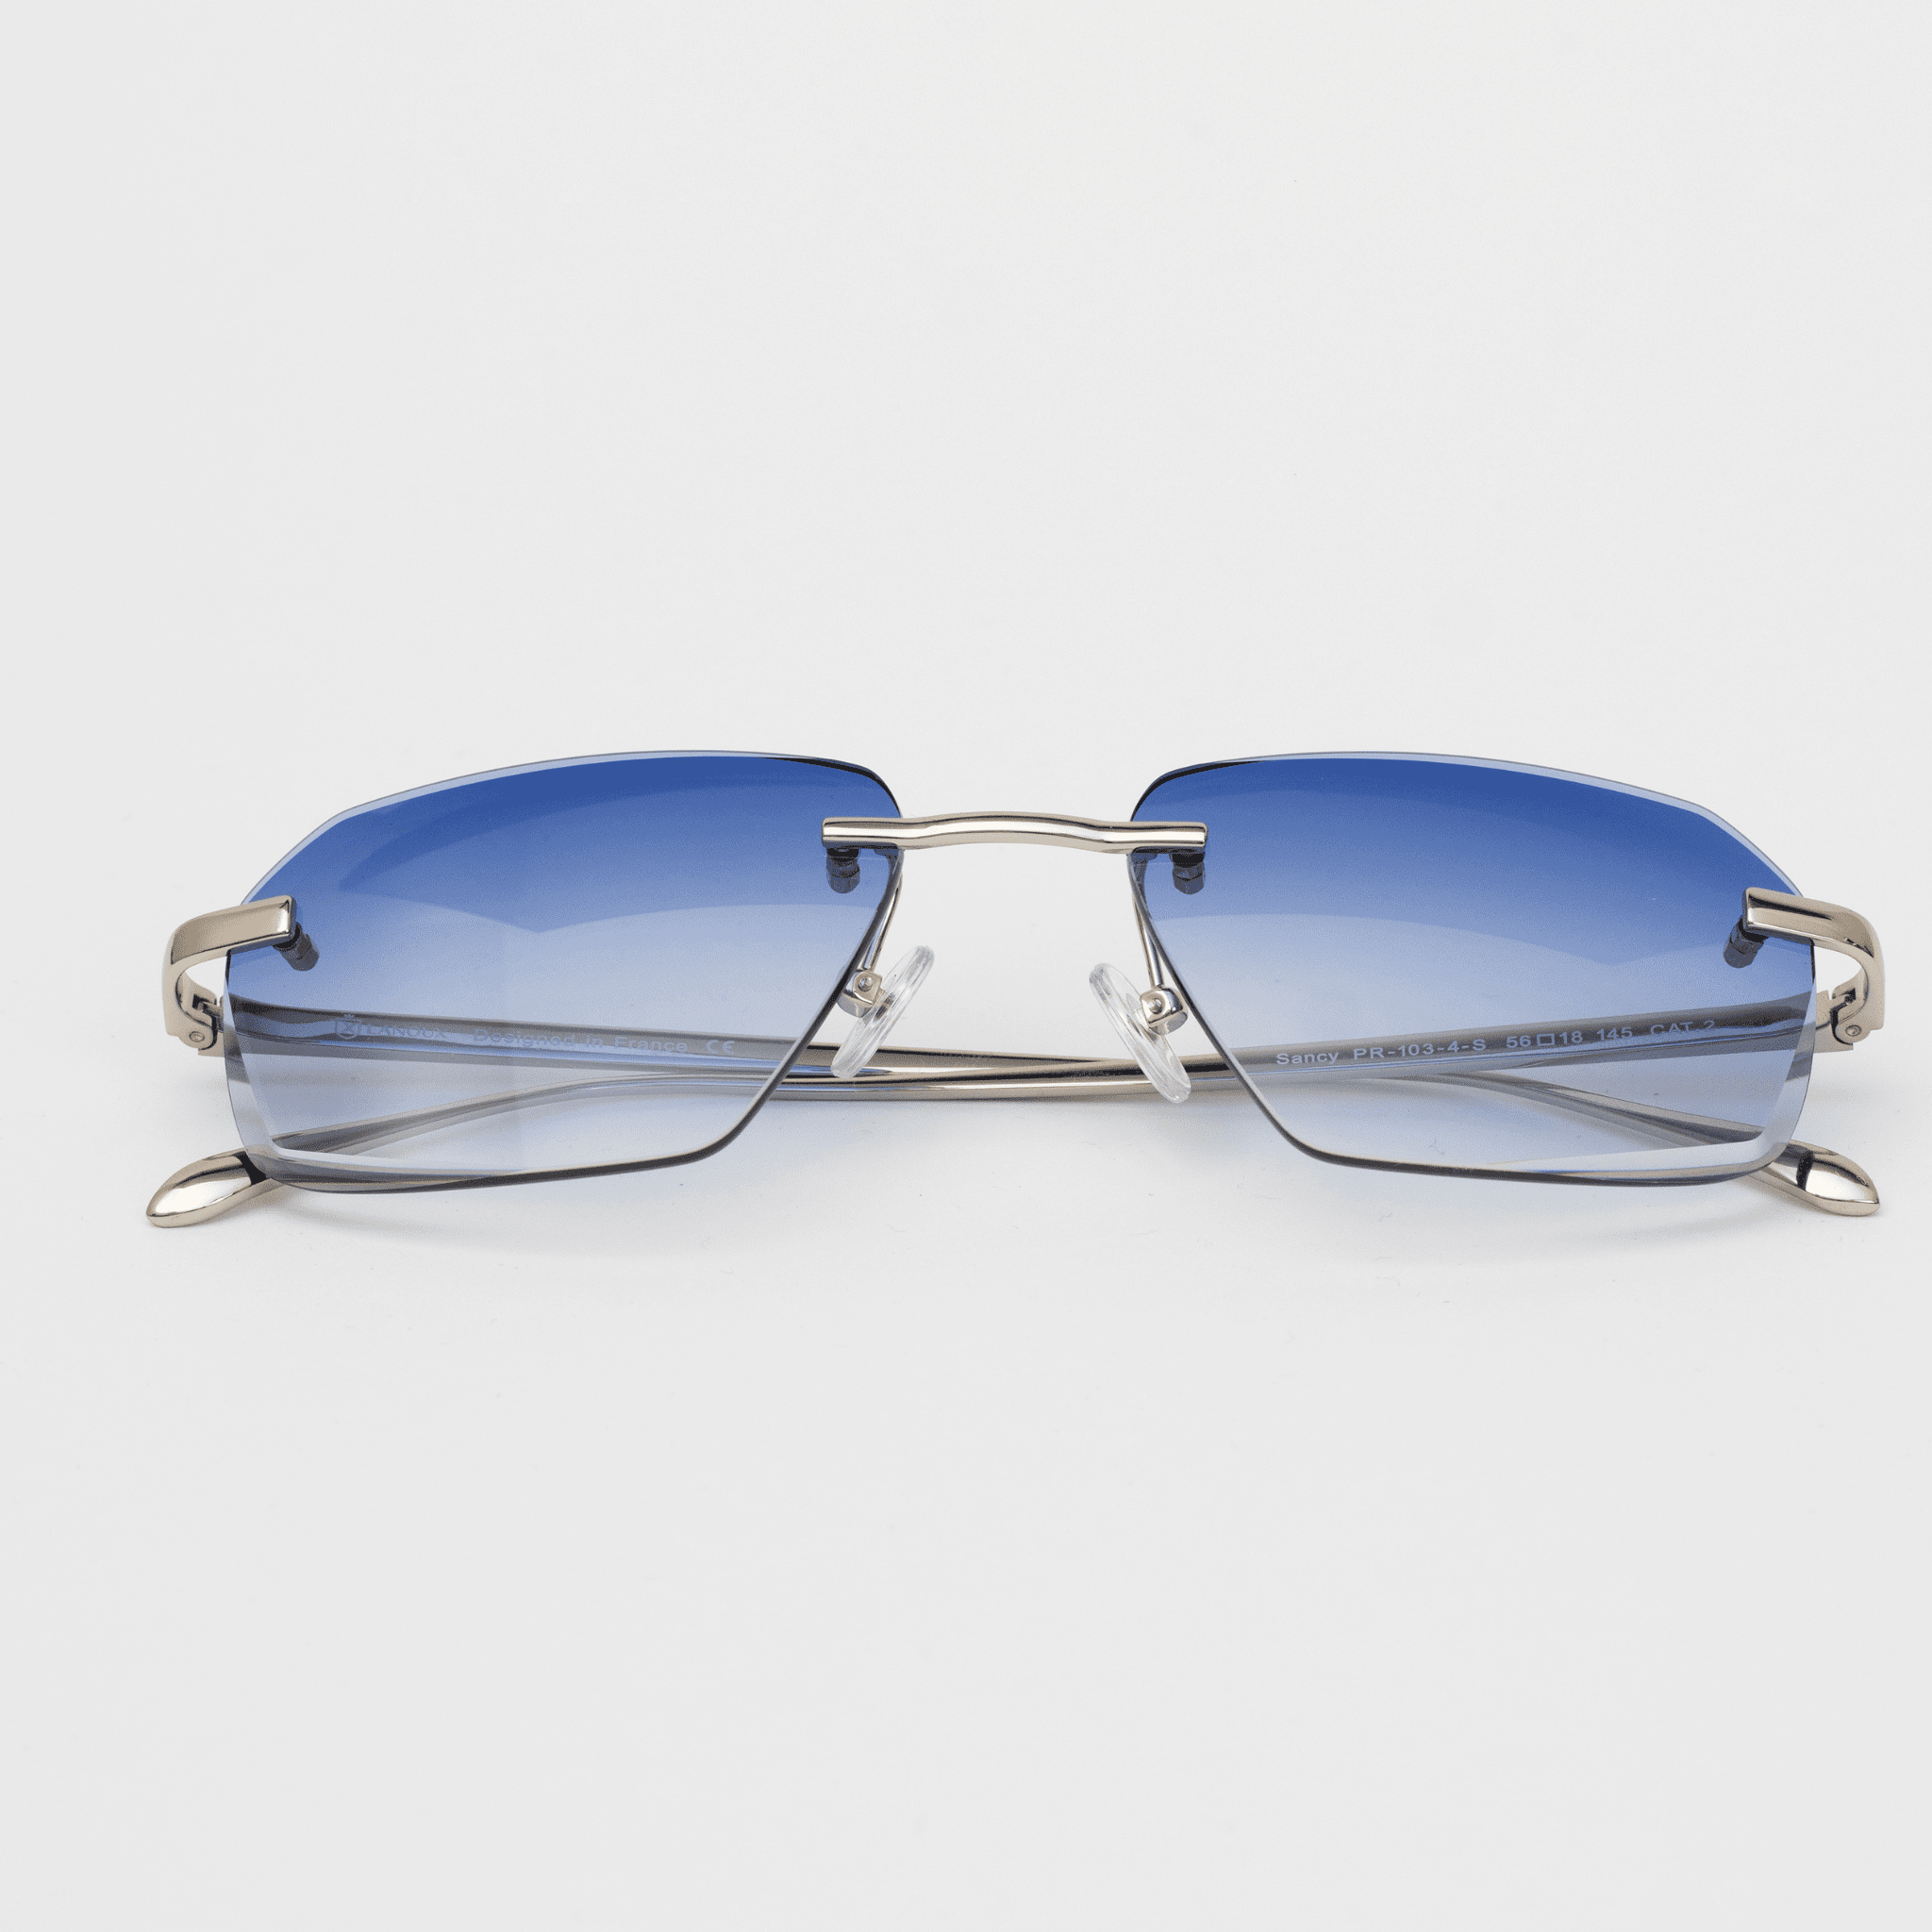 he Sancy rimless glasses feature a striking diamond cut with onyx blue lenses, held by a sleek sterling silver frame, displayed in a front-facing angle against a white background.